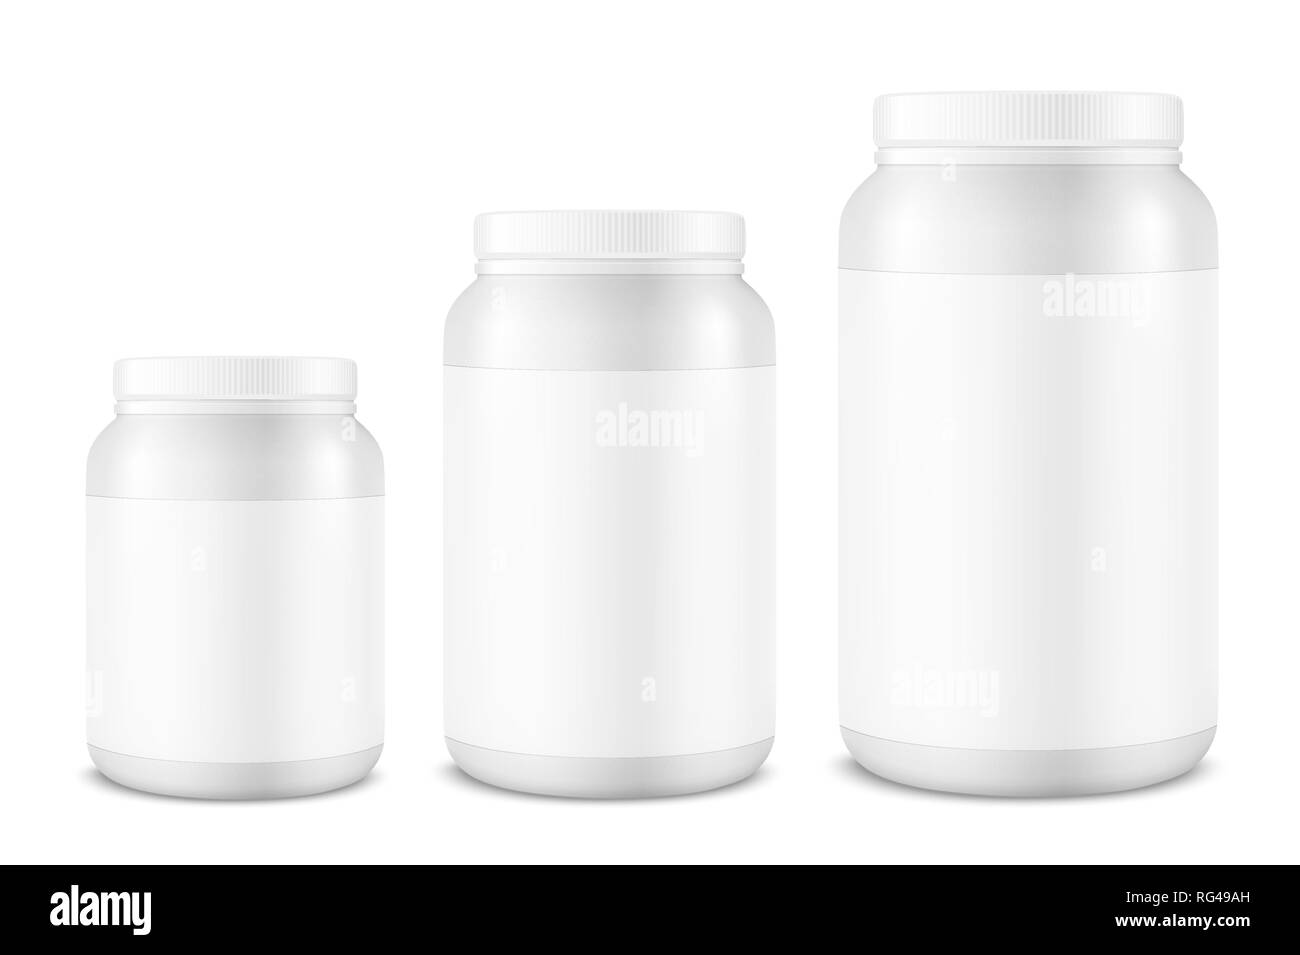 Vector Realistic 3d White Plastic Jar, Can with Lid Set Closeup Isolated on White Background. Design Template of Whey Protein, Sport Powder, Vitamins Stock Vector